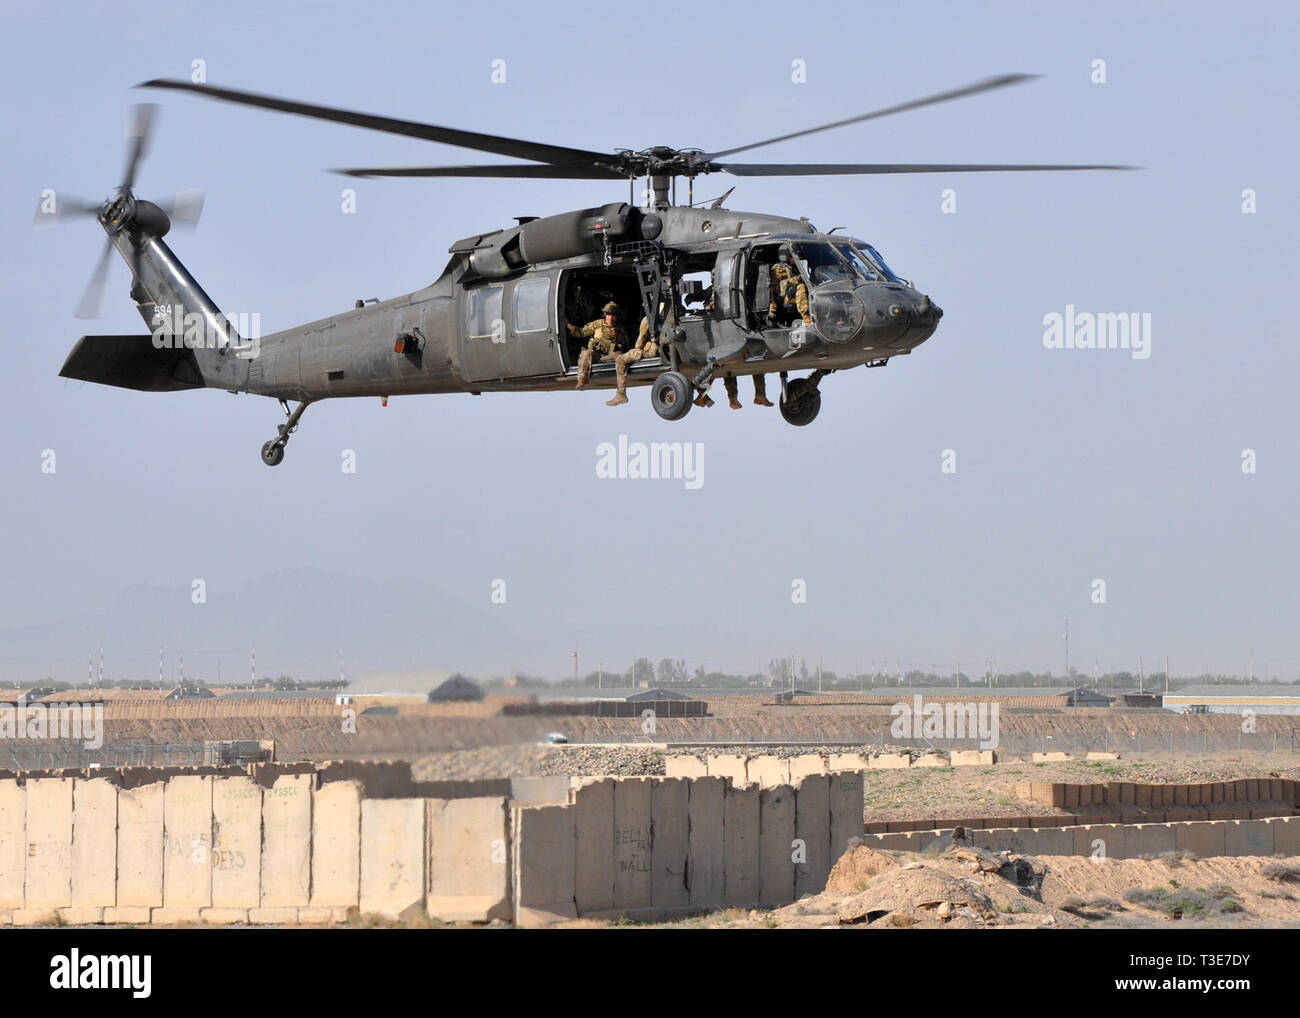 Army National Guardsmen and Air Force pararescuemen from the 64th Expeditionary Rescue Squadron fly in a UH-60 Blackhawk helicopter over Kandahar Airfield, Afghanistan, during joint training April 5, 2019. The rescue Airmen and Soldiers work and train together regularly to be prepared to save lives across the region. (U.S. Air Force photo by Capt. Anna-Marie Wyant) Stock Photo